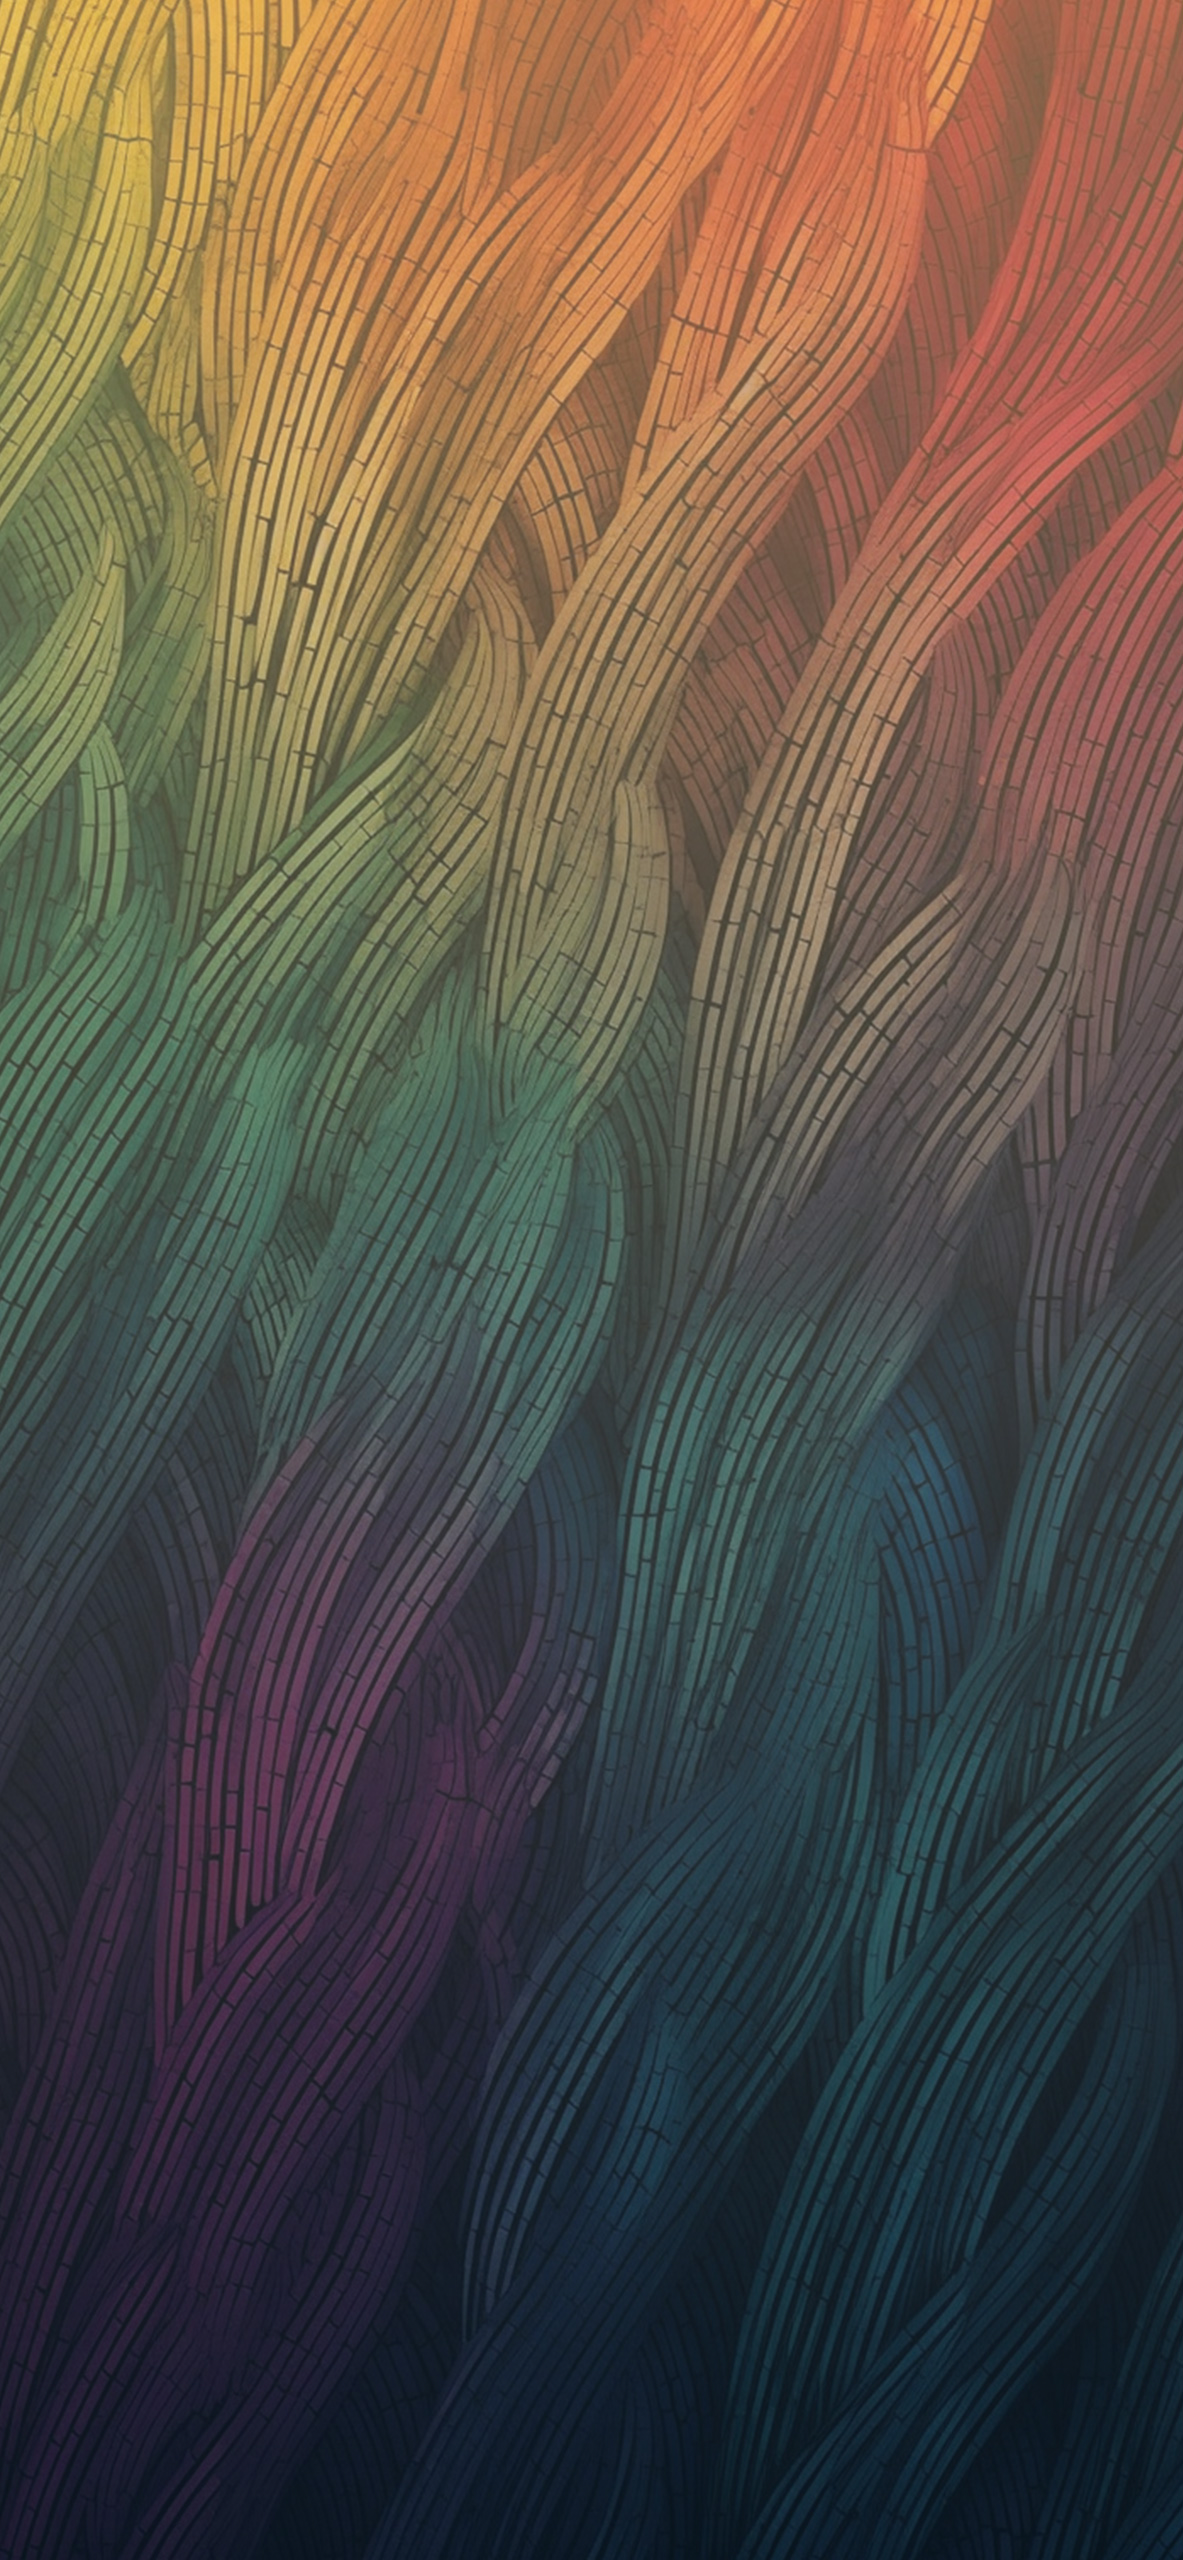 abstract rainbow wallpapers hd